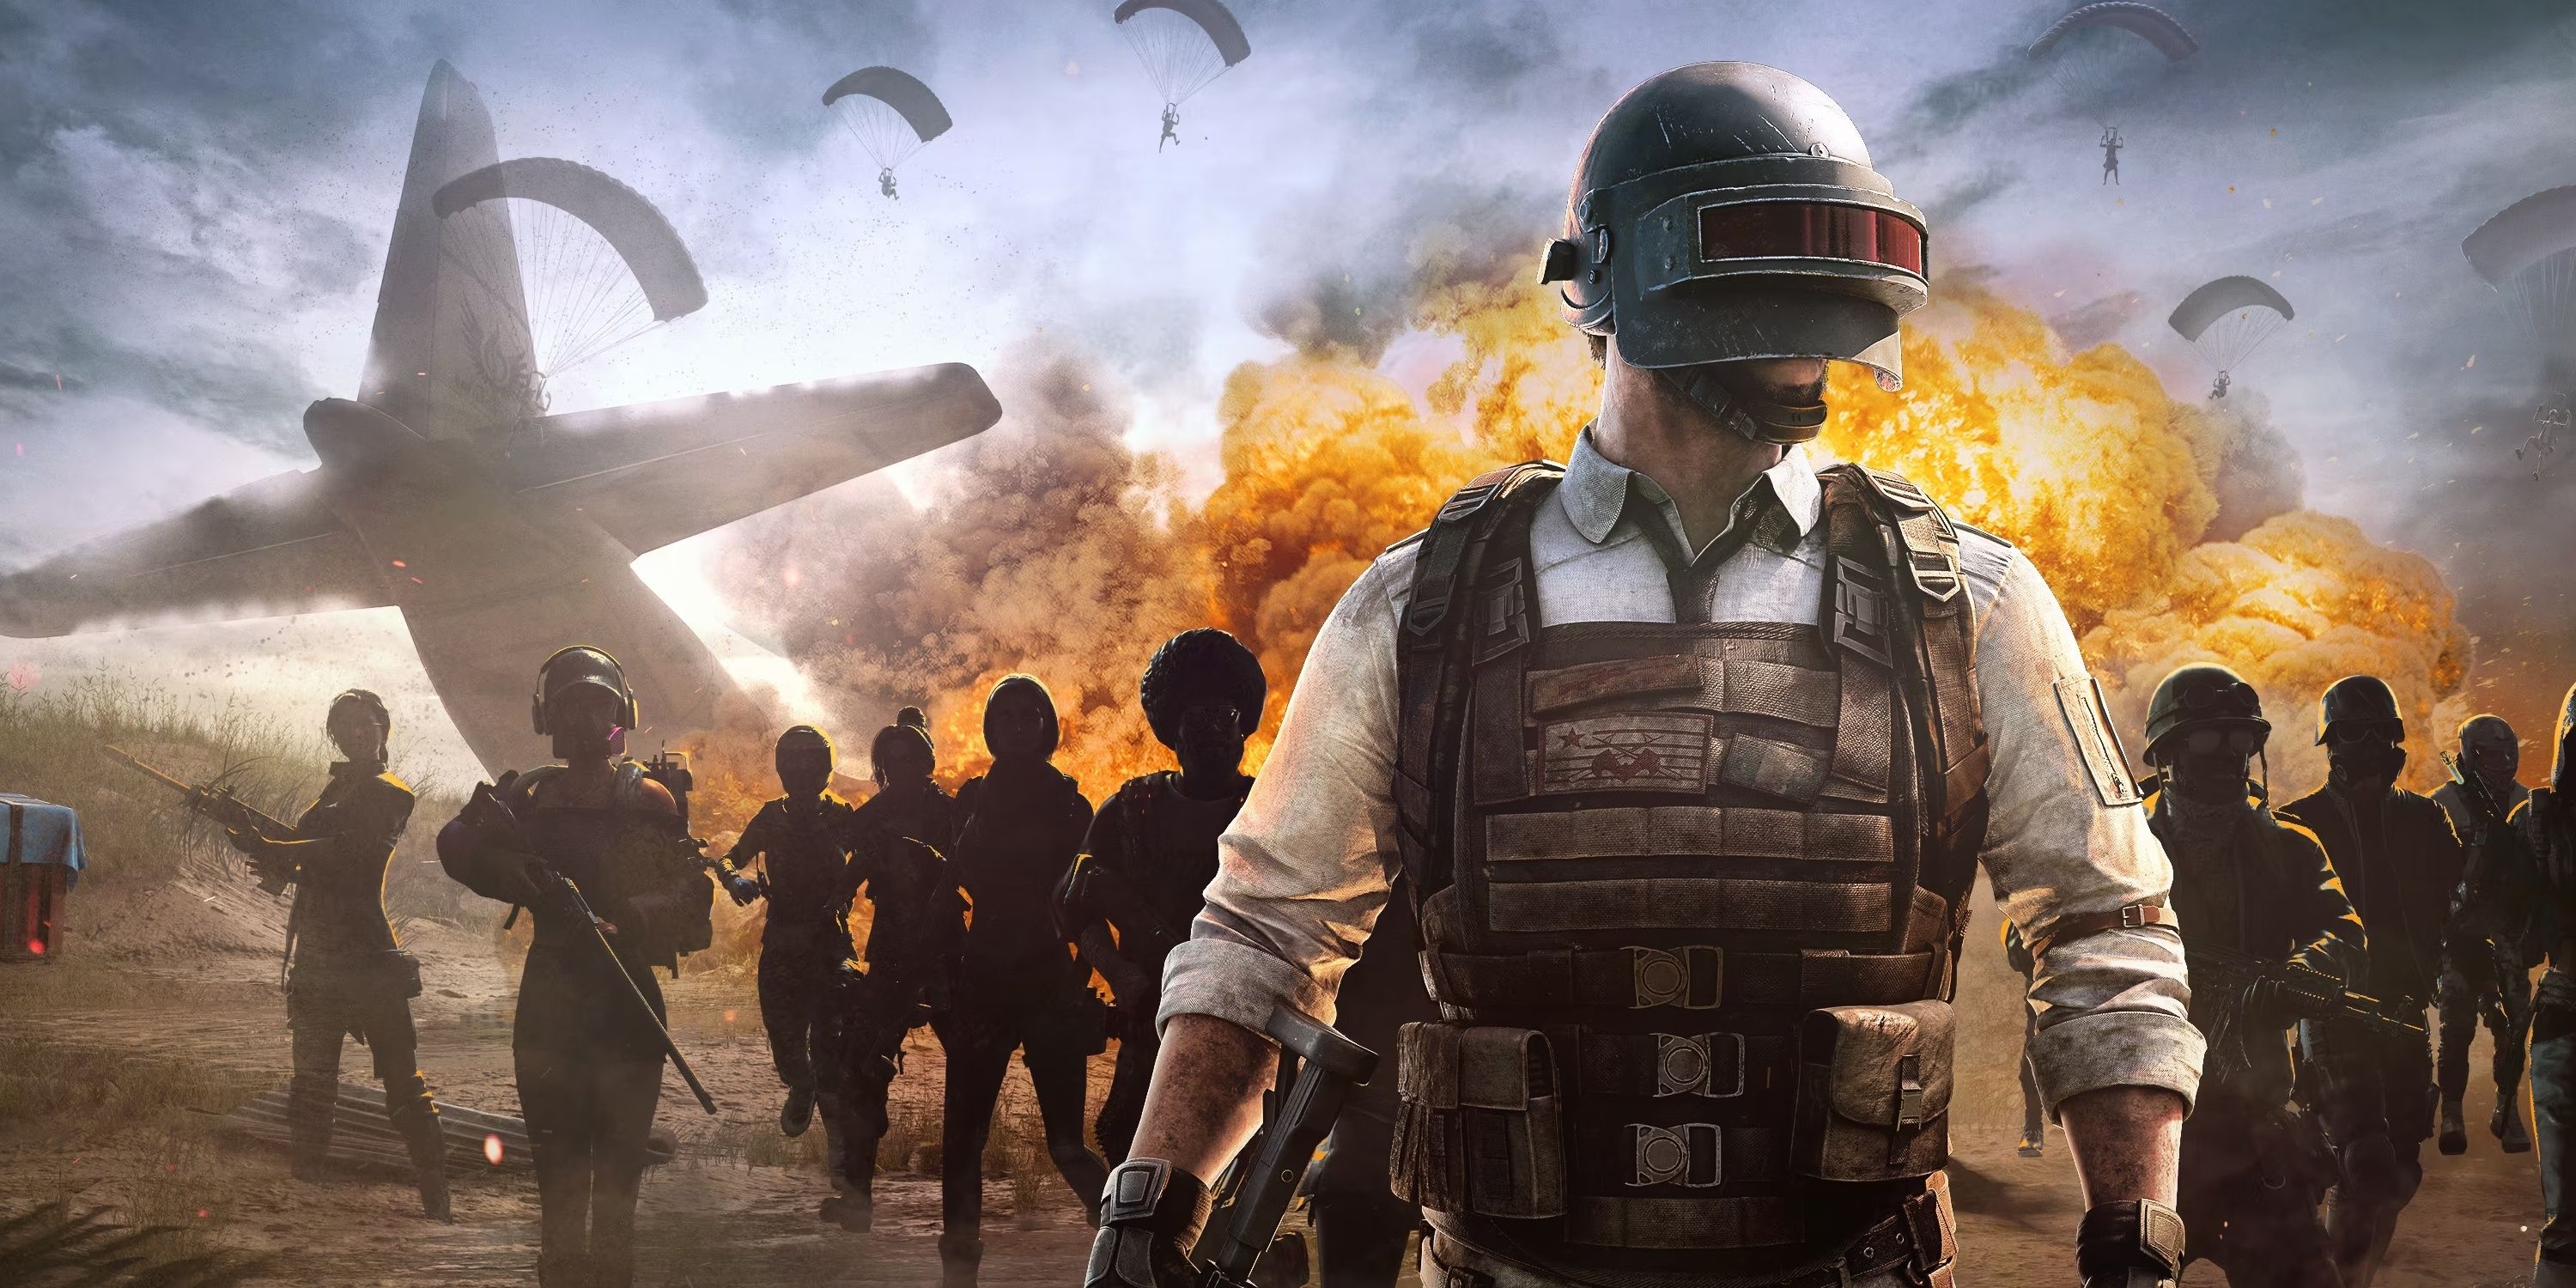 PUBG Artwork Plane Crashing And Exploding Behind An Armed Team